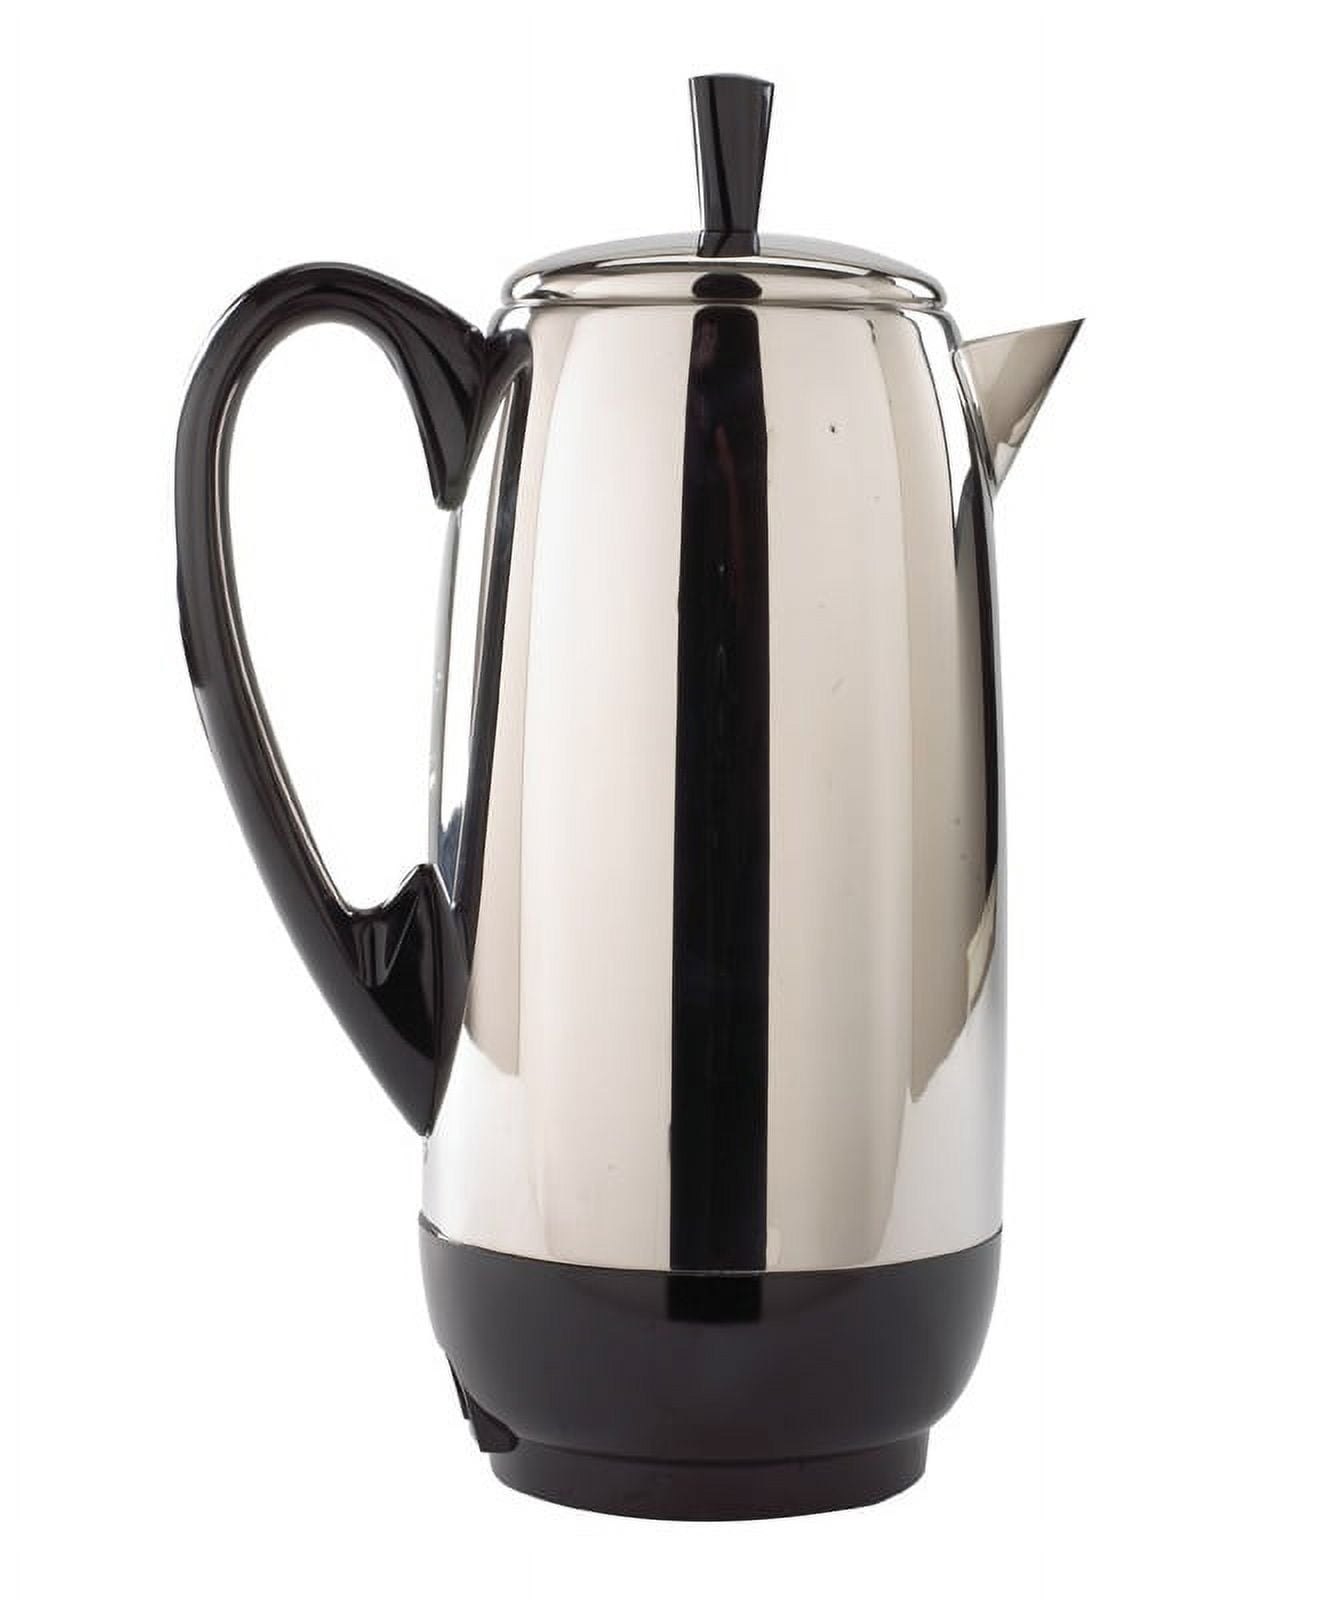 Farberware 2-4 Cup Percolator Stainless Steel Electric Coffee Pot FCP240